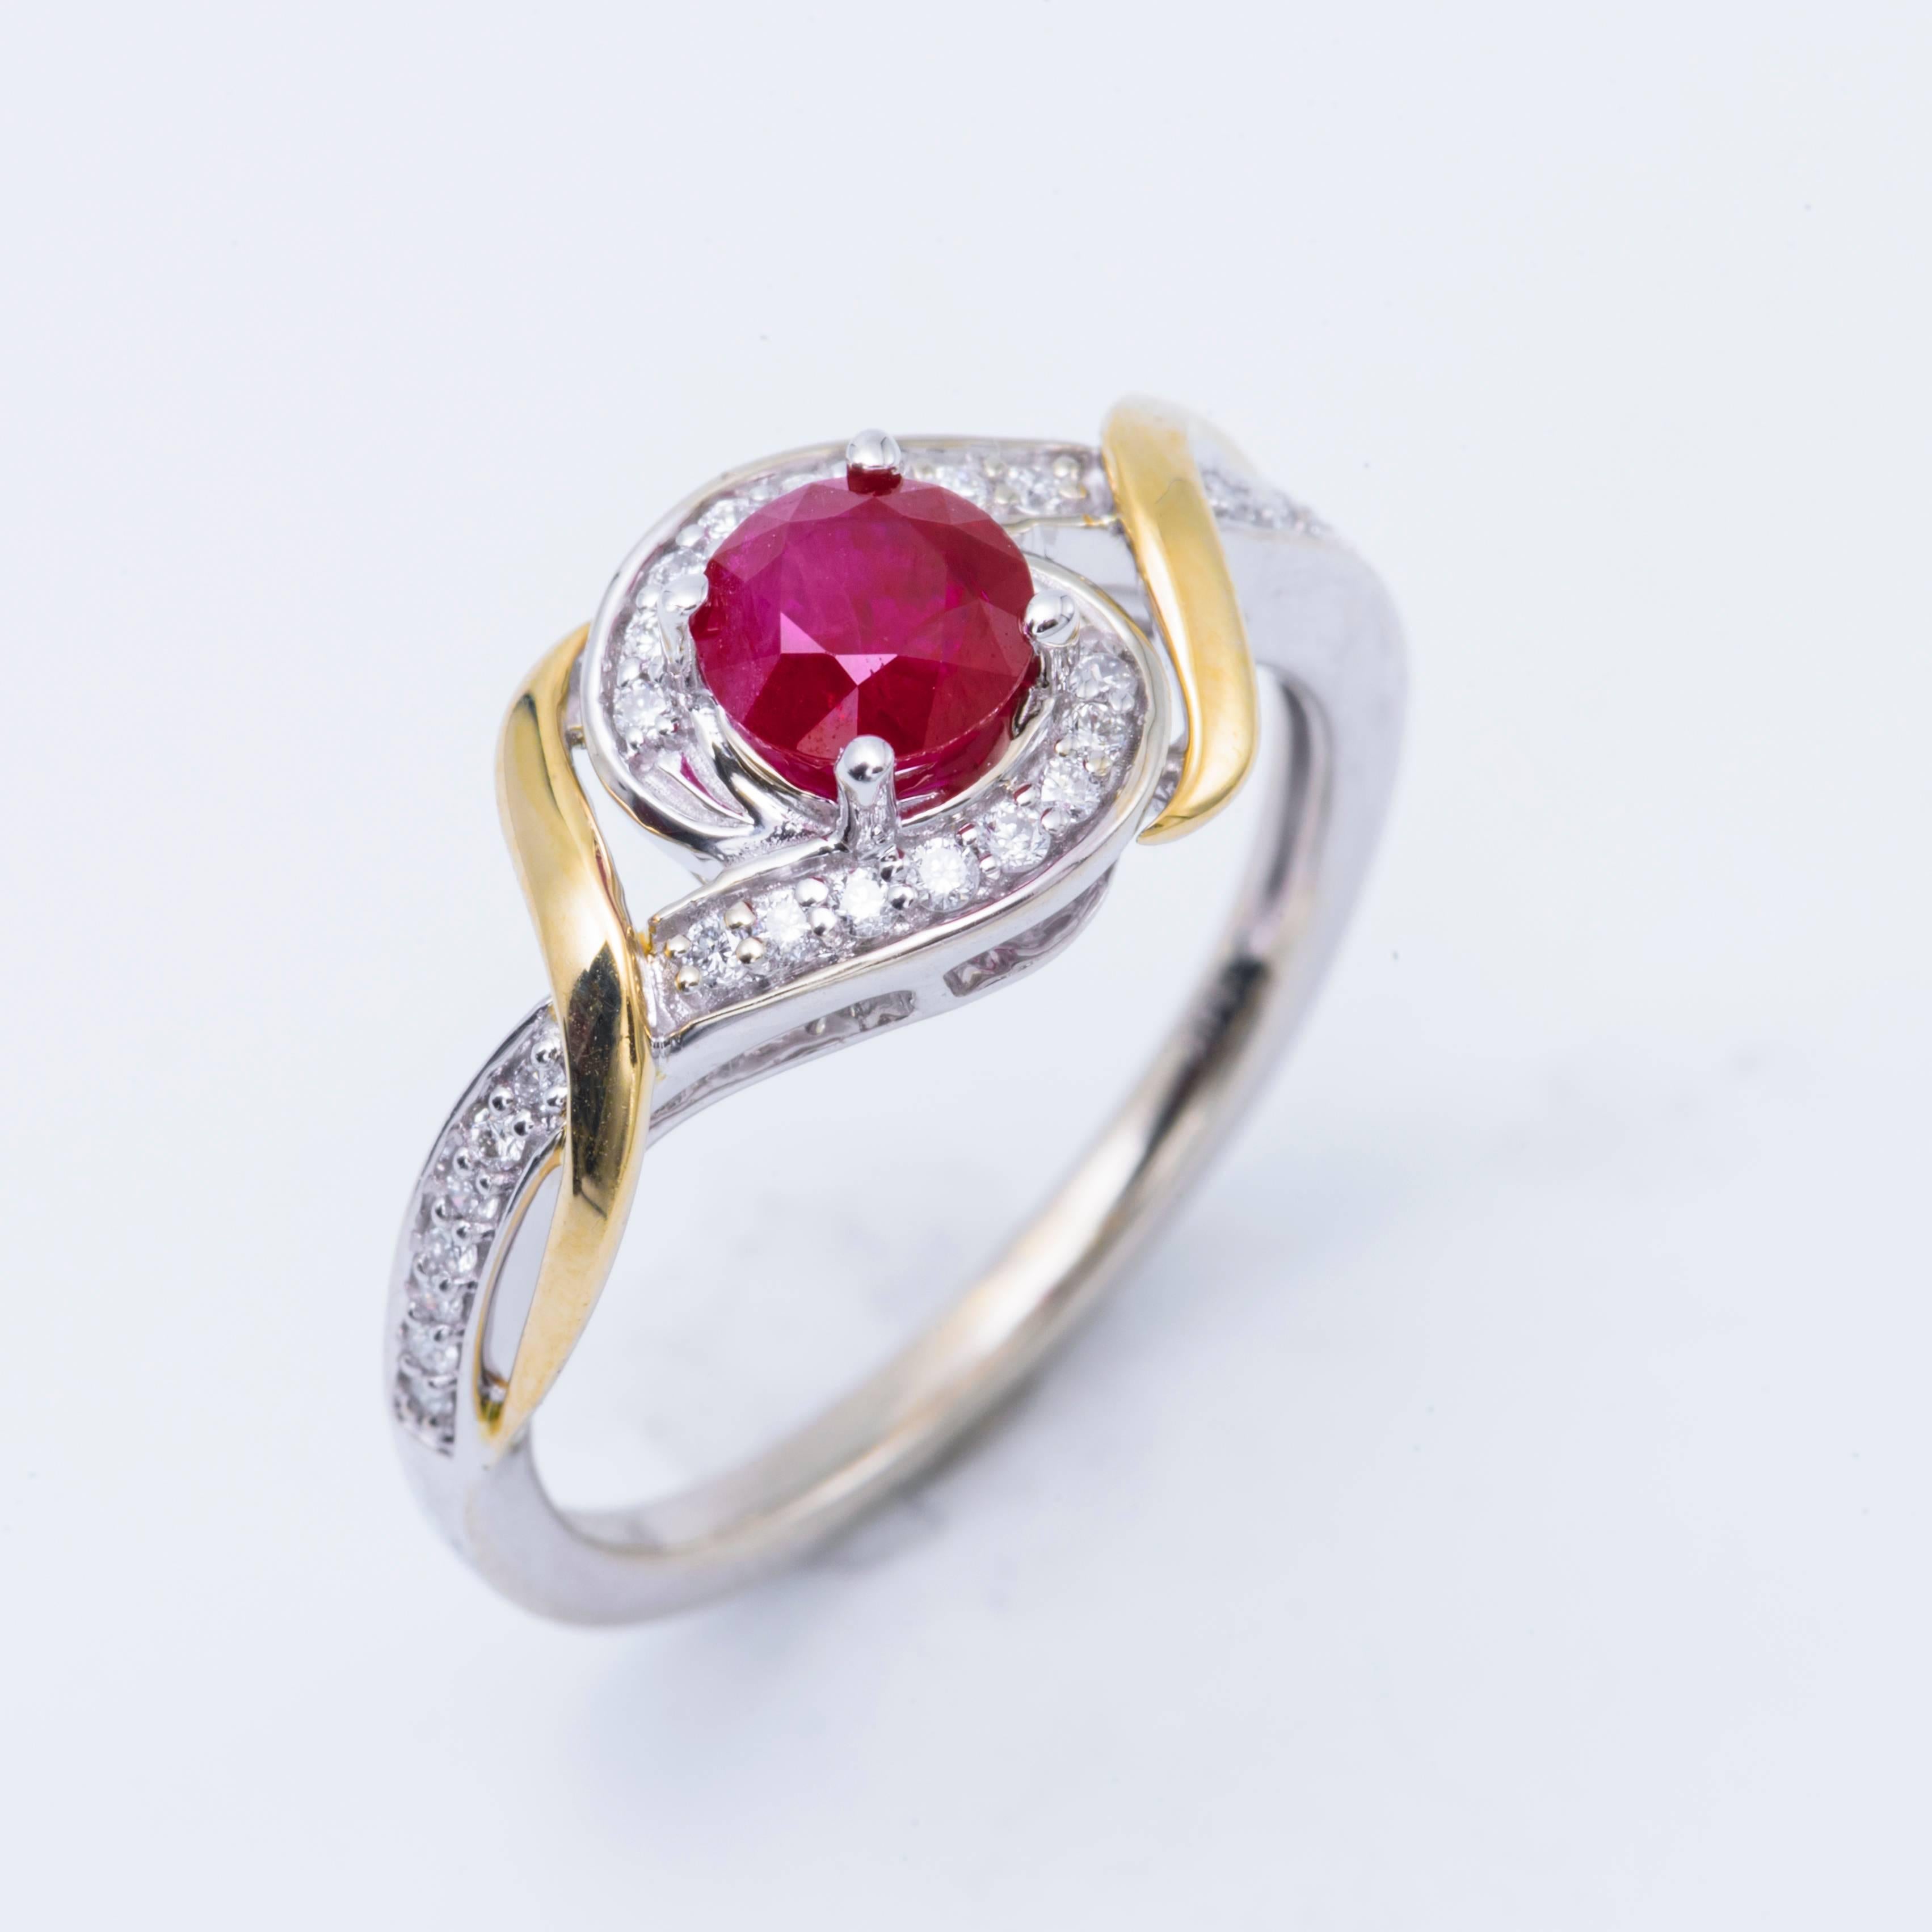 14k White/Yellow Gold  Round Shape Ruby  Diamond Halo Engagement Ring
Material: 14k White/Yellow Gold
Gemstone Details: 1 Round Shape Ruby approximately 0.54ct. 5 mm
Diamond Details: Approximately 0.15ctw of diamonds. Diamonds are H in color and SI